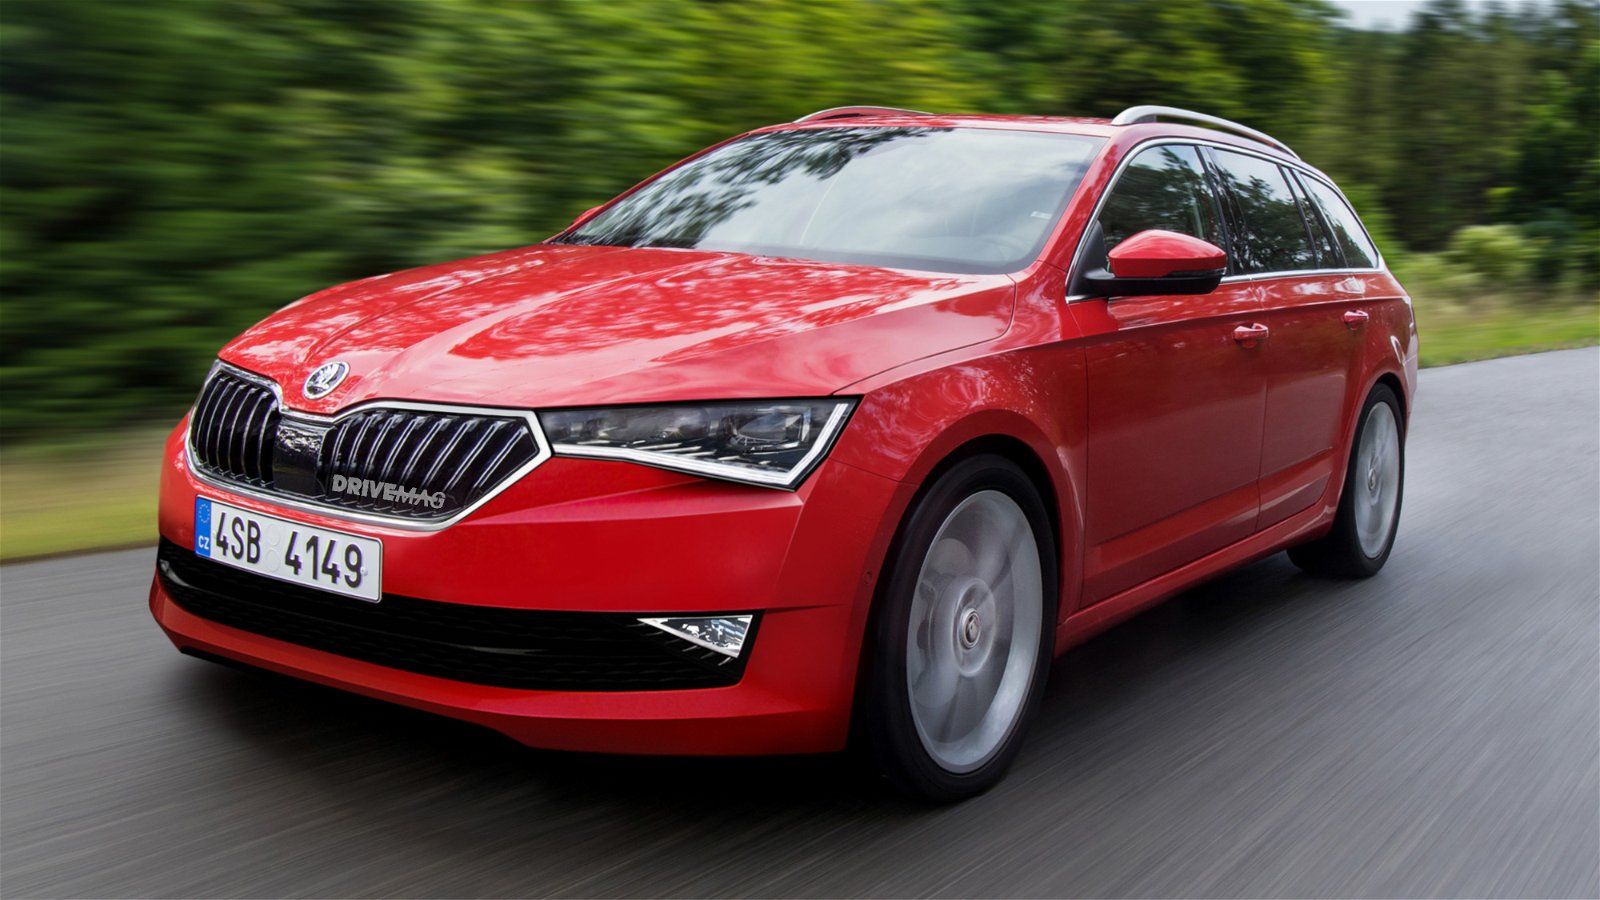 Polering lysere Veluddannet New Skoda Octavia to debut later this year | DriveMag Cars